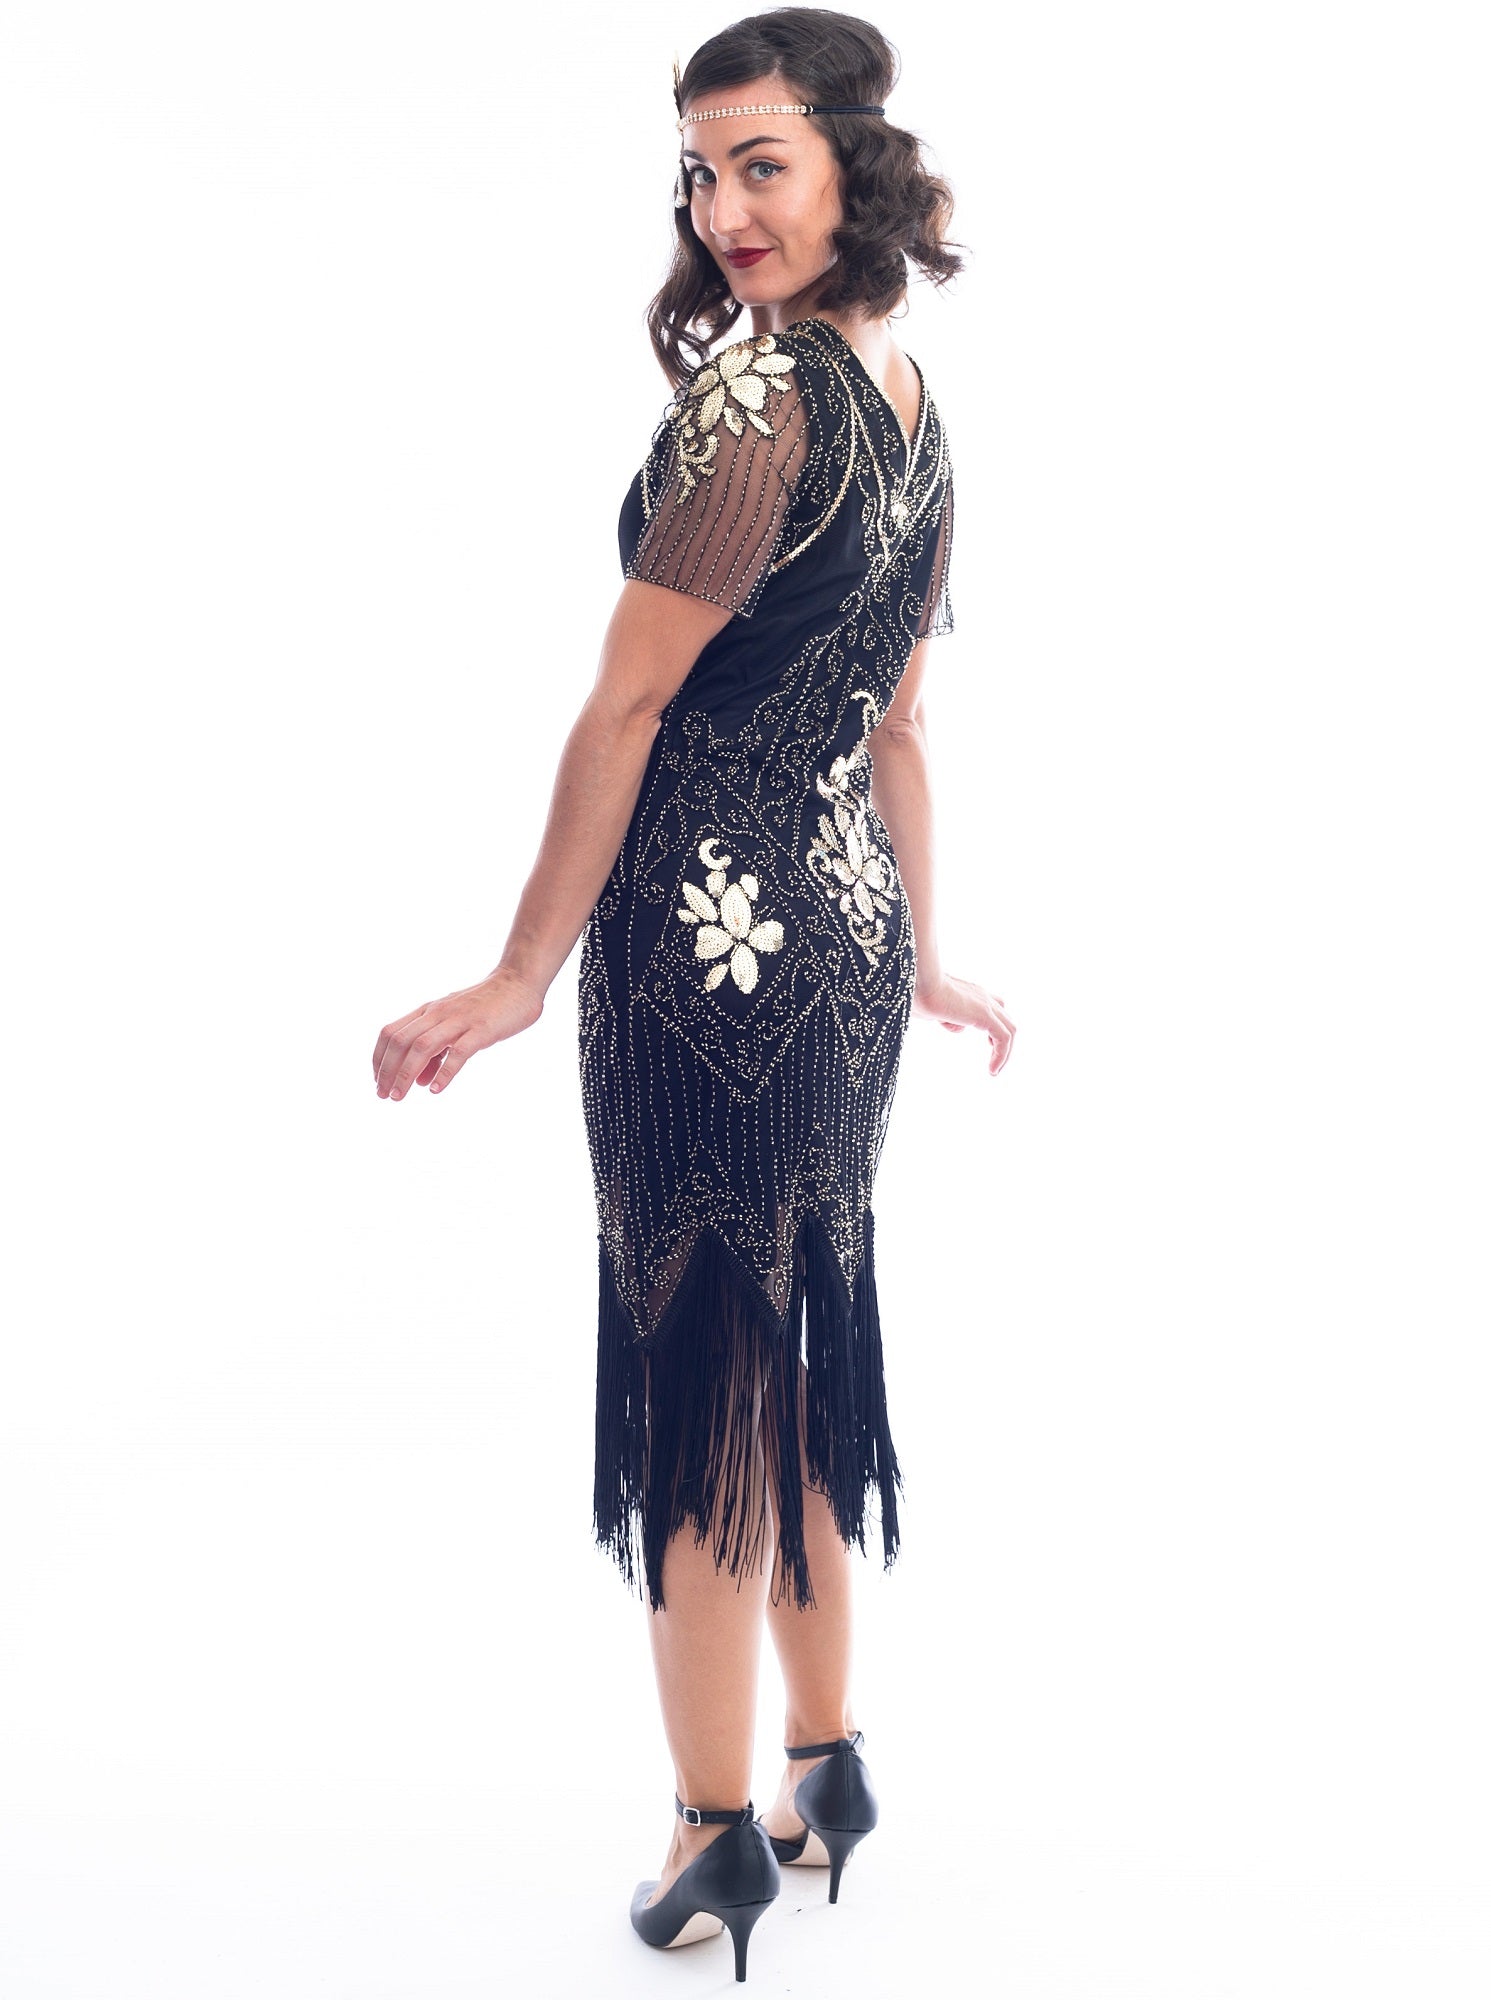 A Black Plus Size Gatsby Dress with gold sequins, beads and sleeves